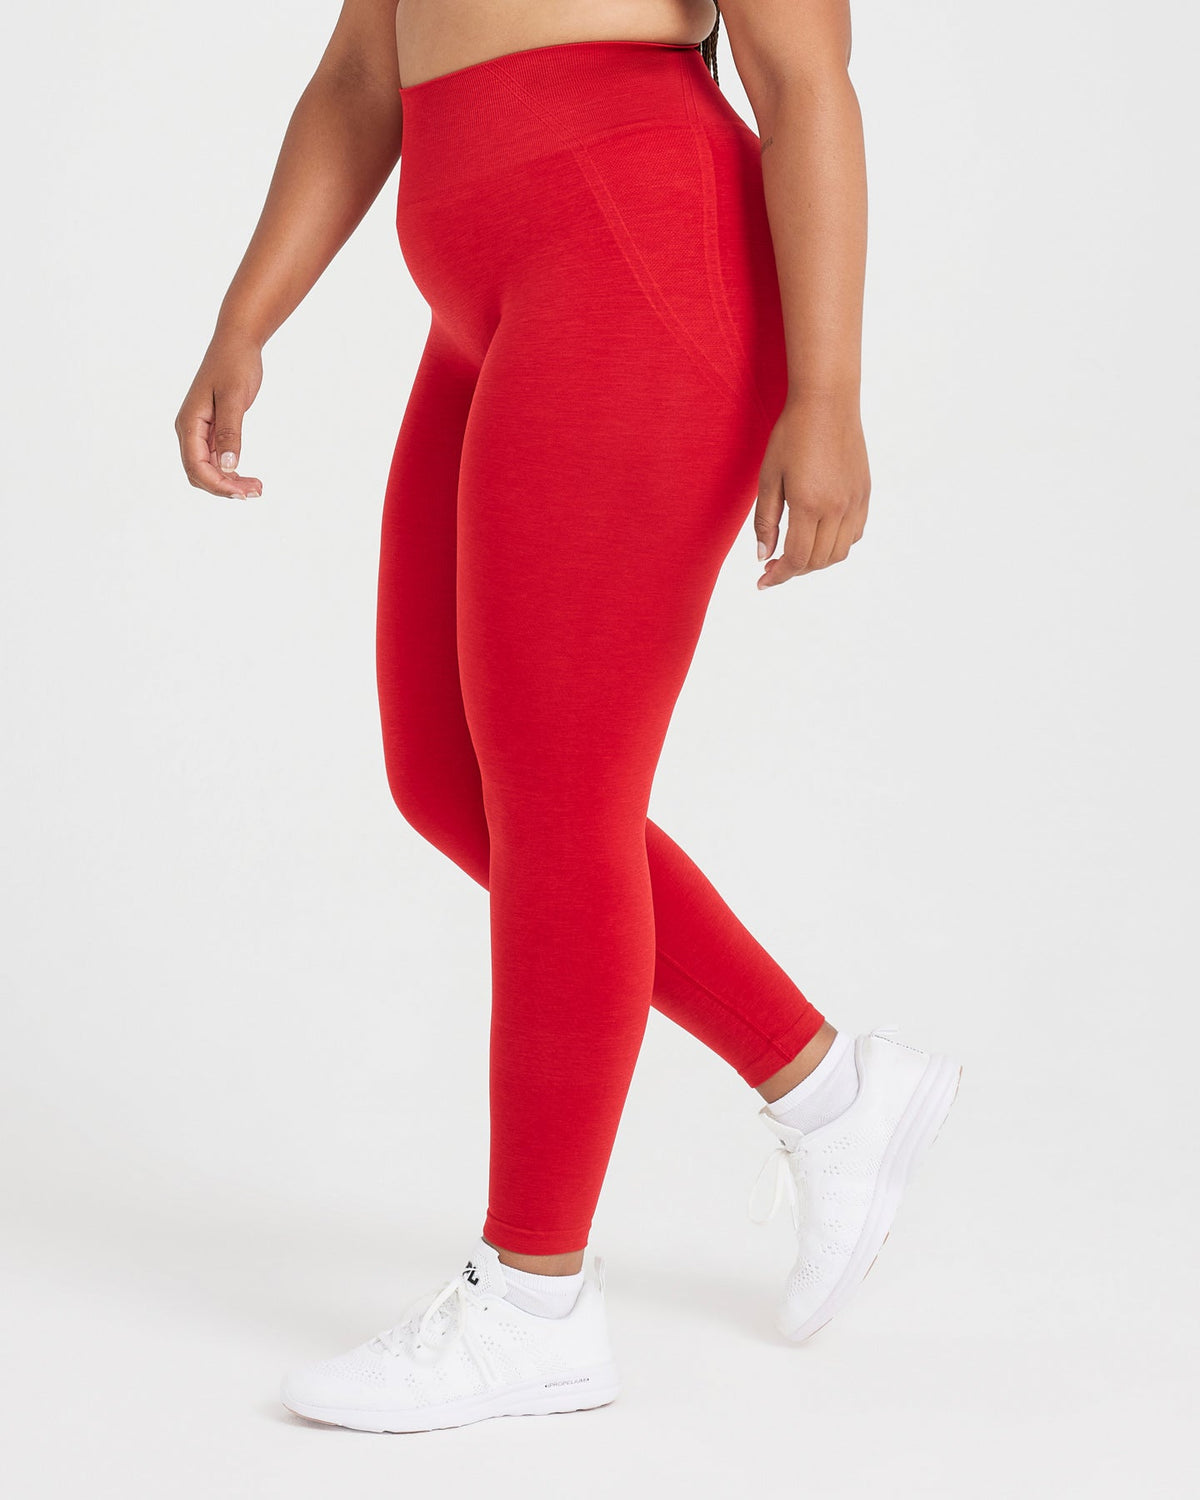 Gym Leggings - High Waisted - Spicy Red